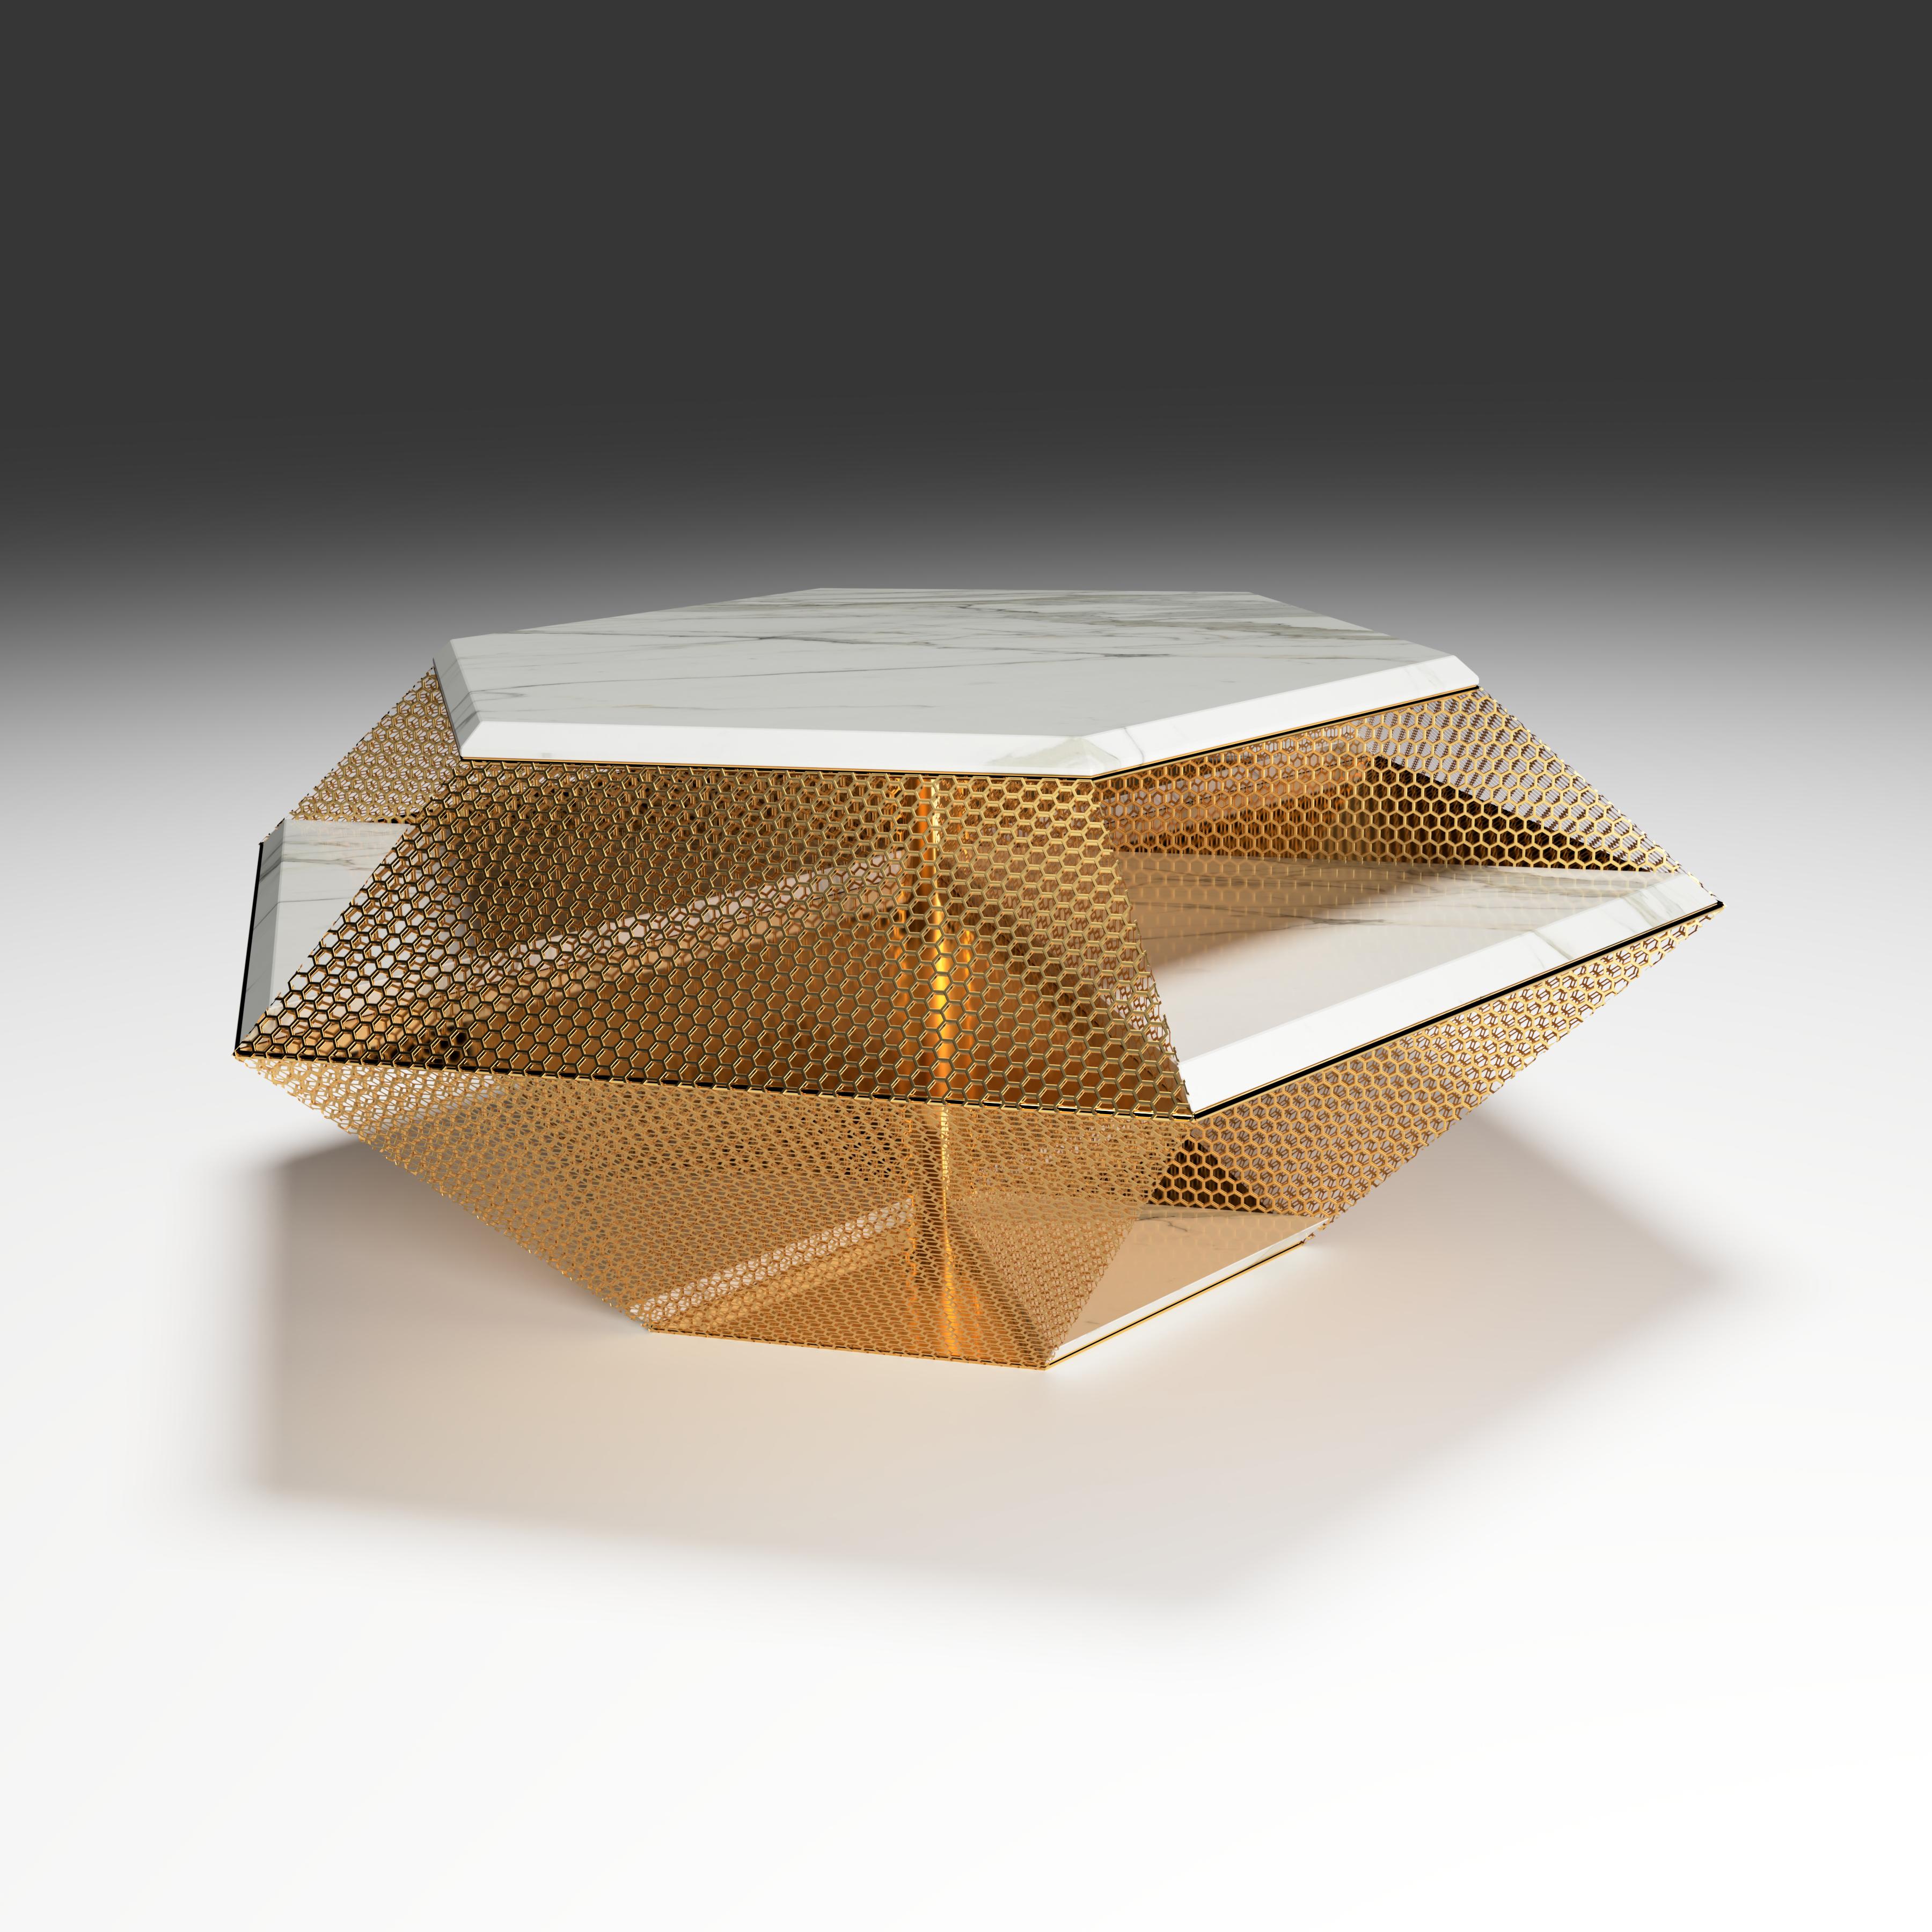 The rough diamond center table, 1 of 1 by Grzegorz Majka
Edition 1 of 1
Dimensions: 45.67 x 39.37 x 17.72 in
Materials: brass details. White Calcatta marble. 


The main inspiration to create this modern table, with a little touch of